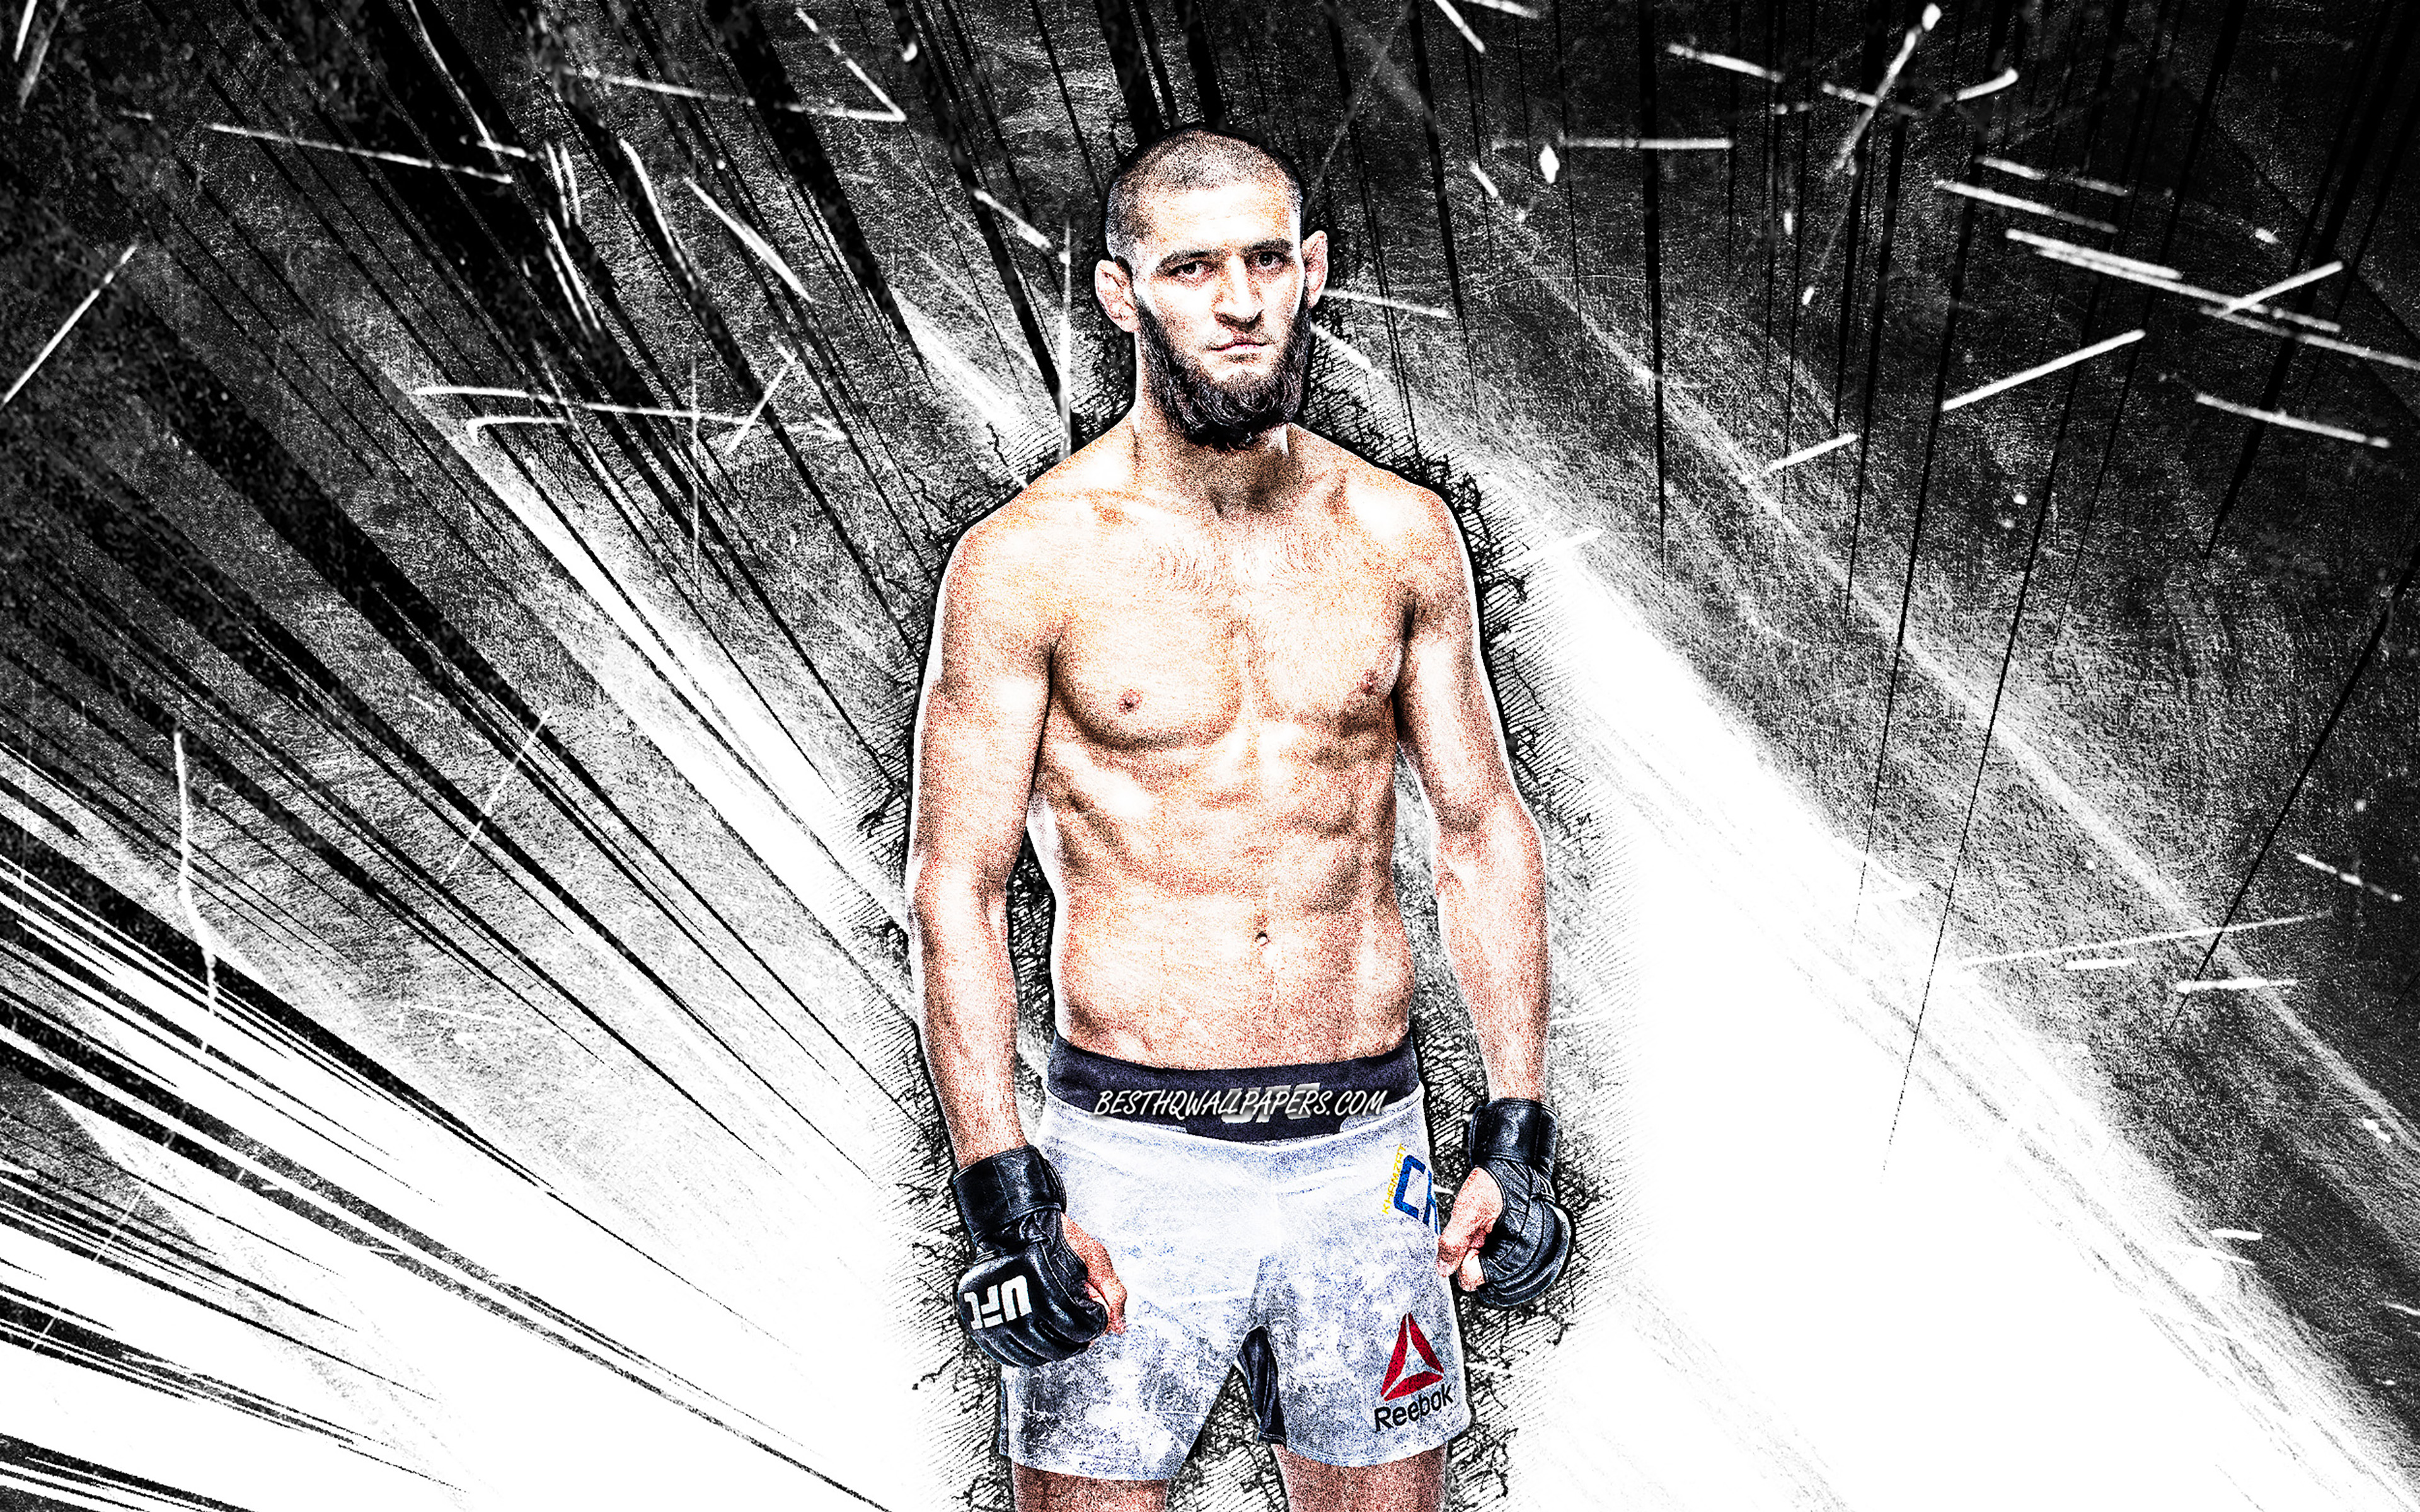 Download wallpaper 4k, Khamzat Chimaev, grunge art, Swedish fighters, MMA, UFC, Mixed martial arts, white abstract rays, Khamzat Chimaev 4K, UFC fighters, MMA fighters for desktop with resolution 3840x2400. High Quality HD